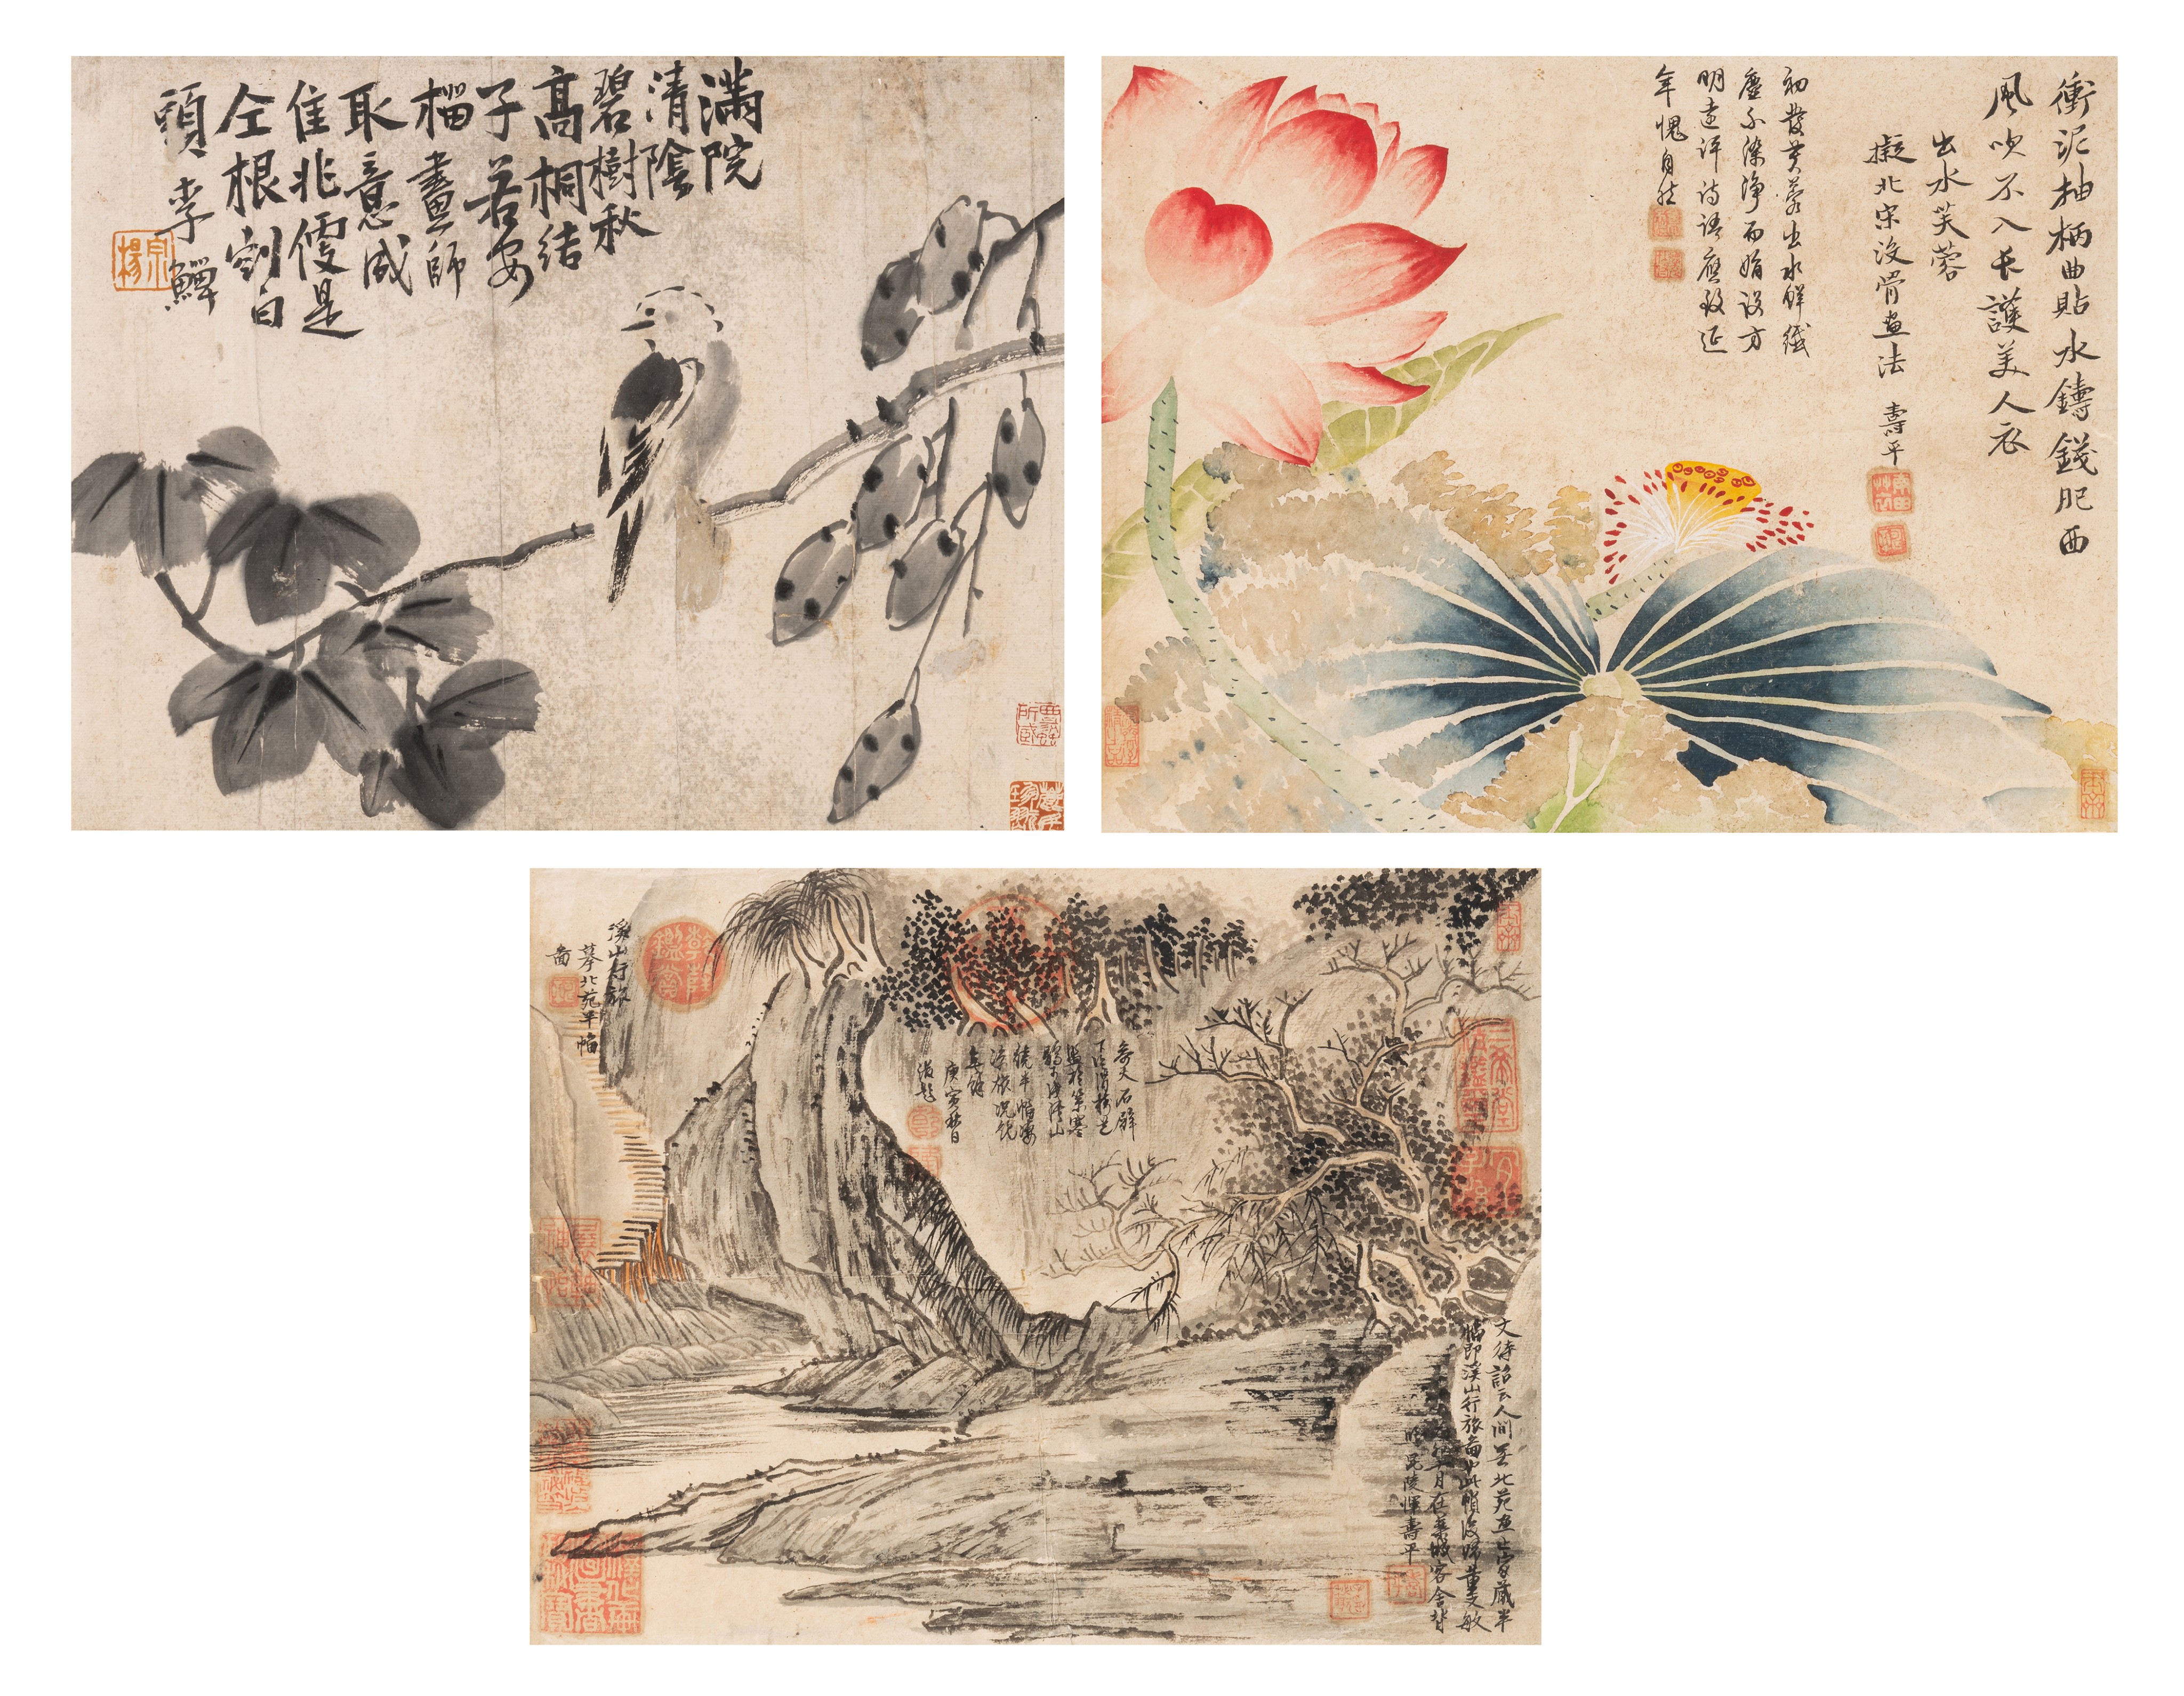 Three Chinese paintings, ink and watercolour on paper, with signature or seal reading Shou Ping and